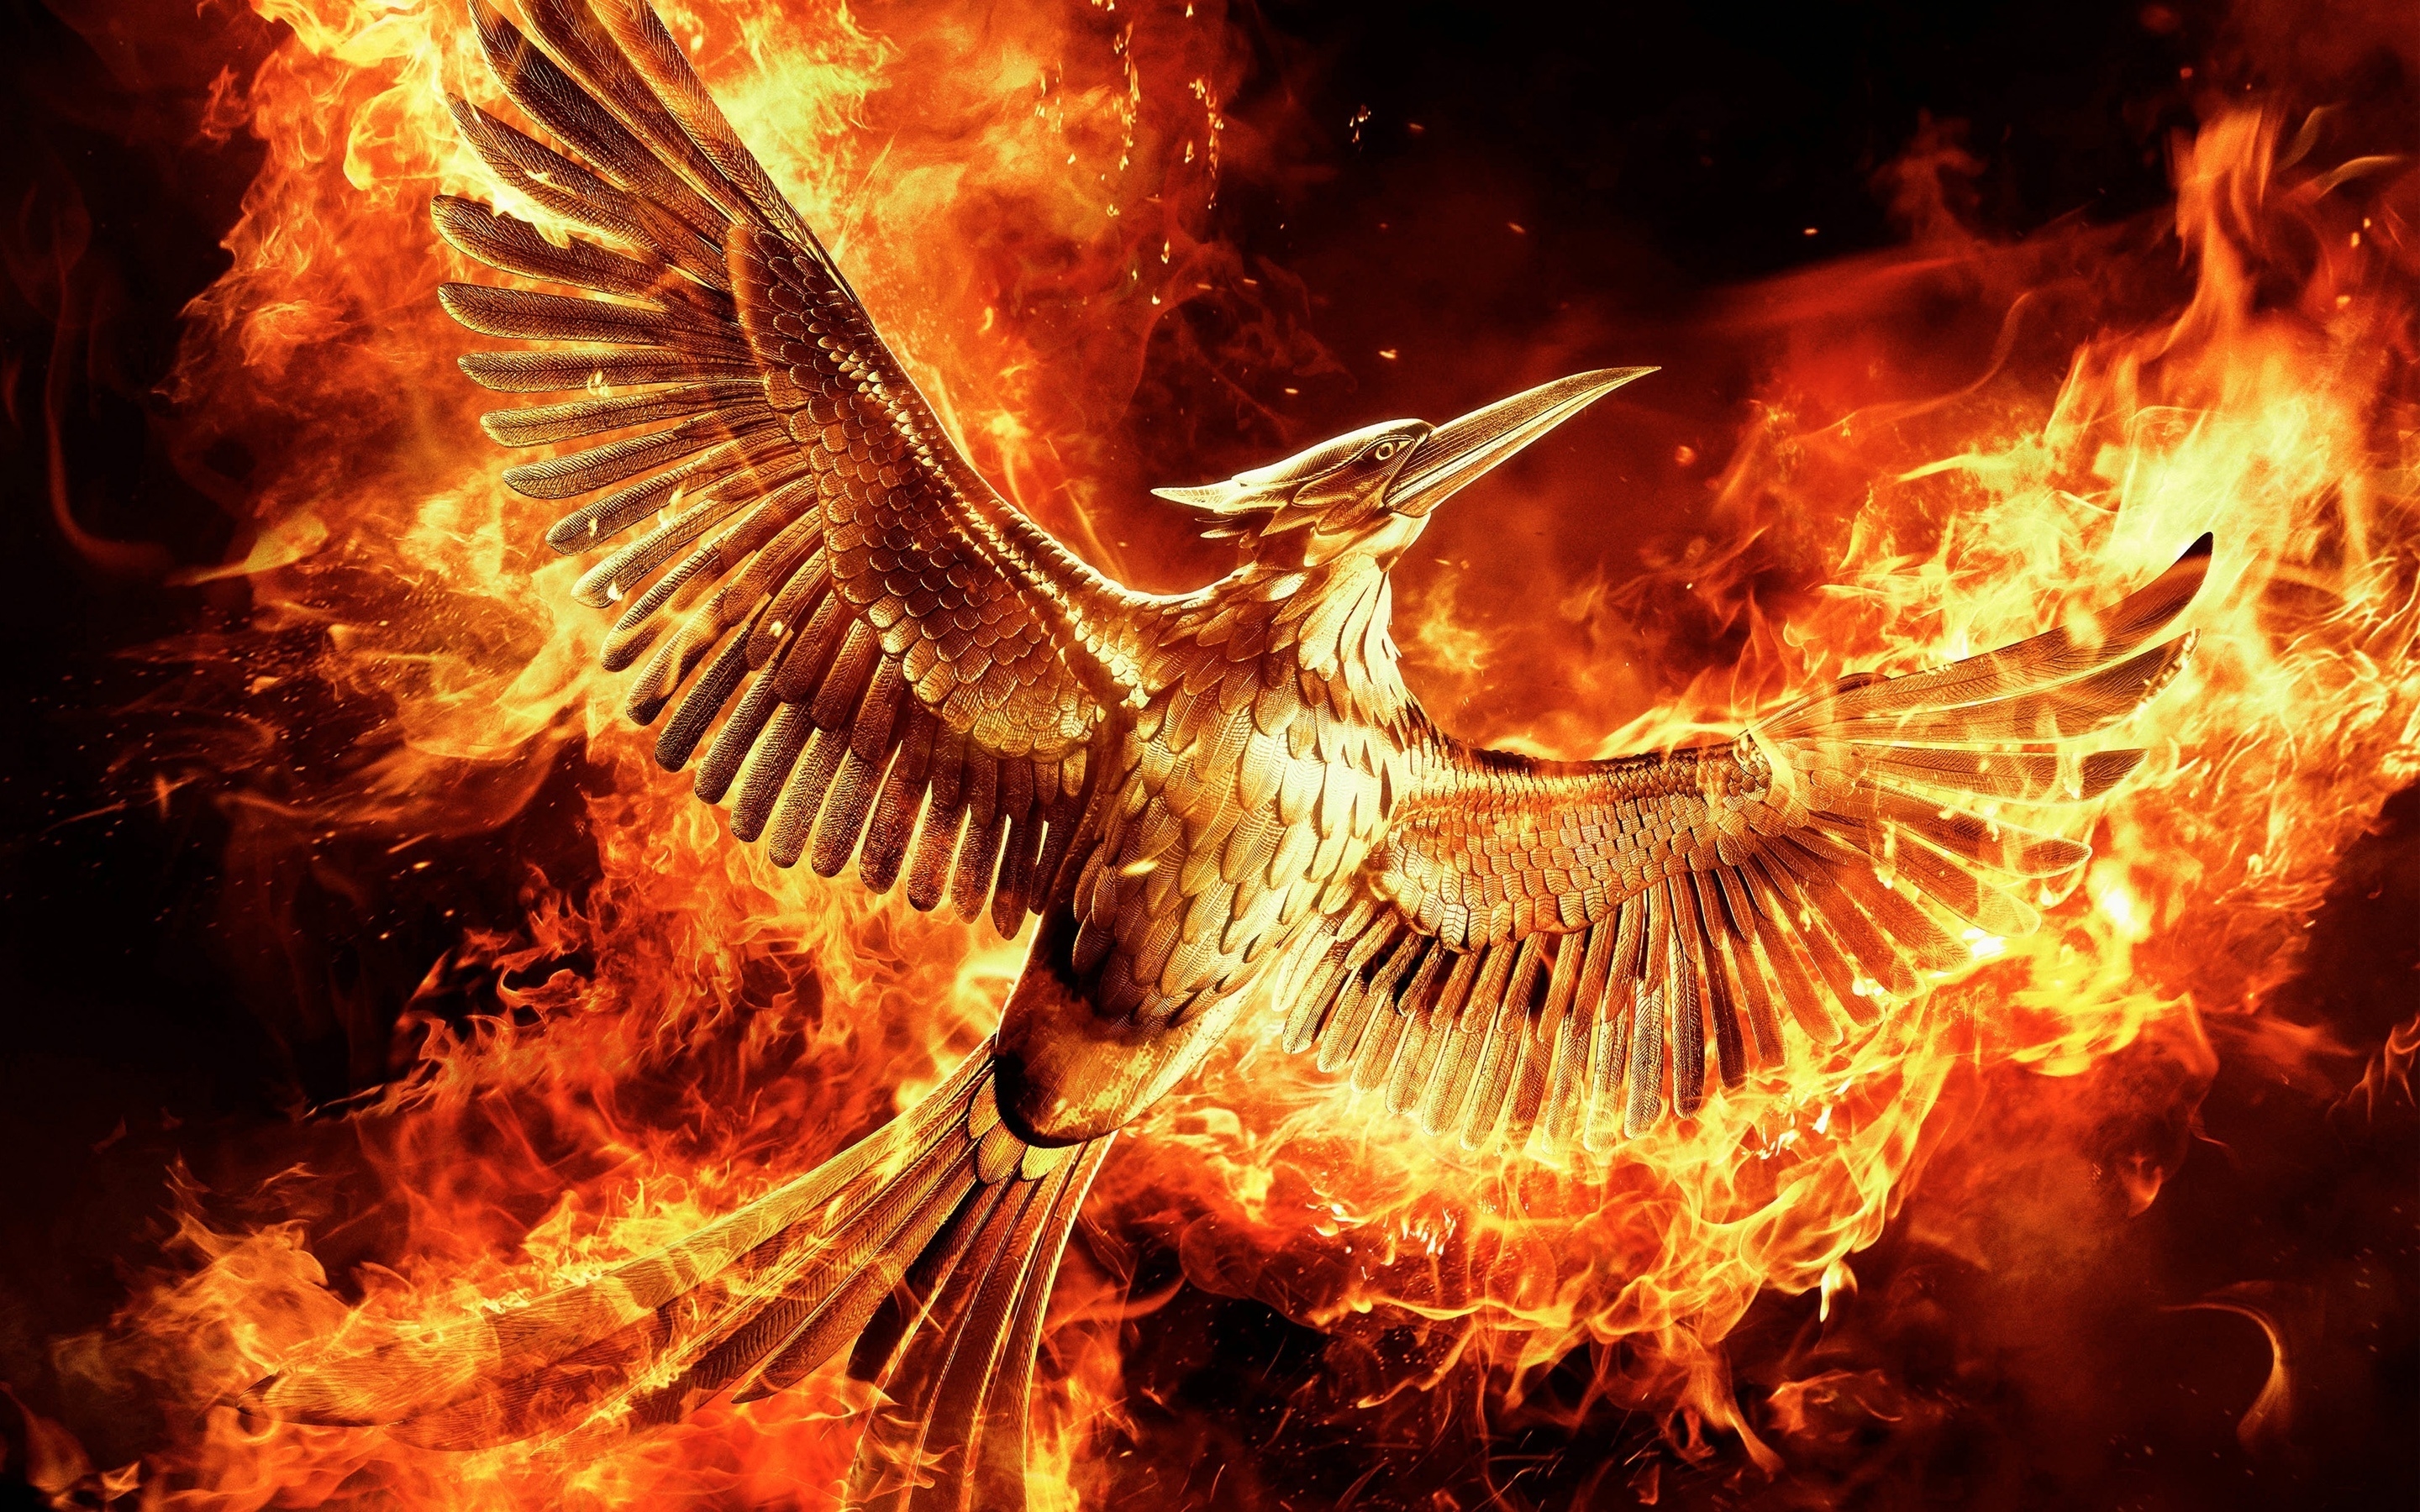 The Hunger Games Mockingjay Part 2 for 2880 x 1800 Retina Display resolution